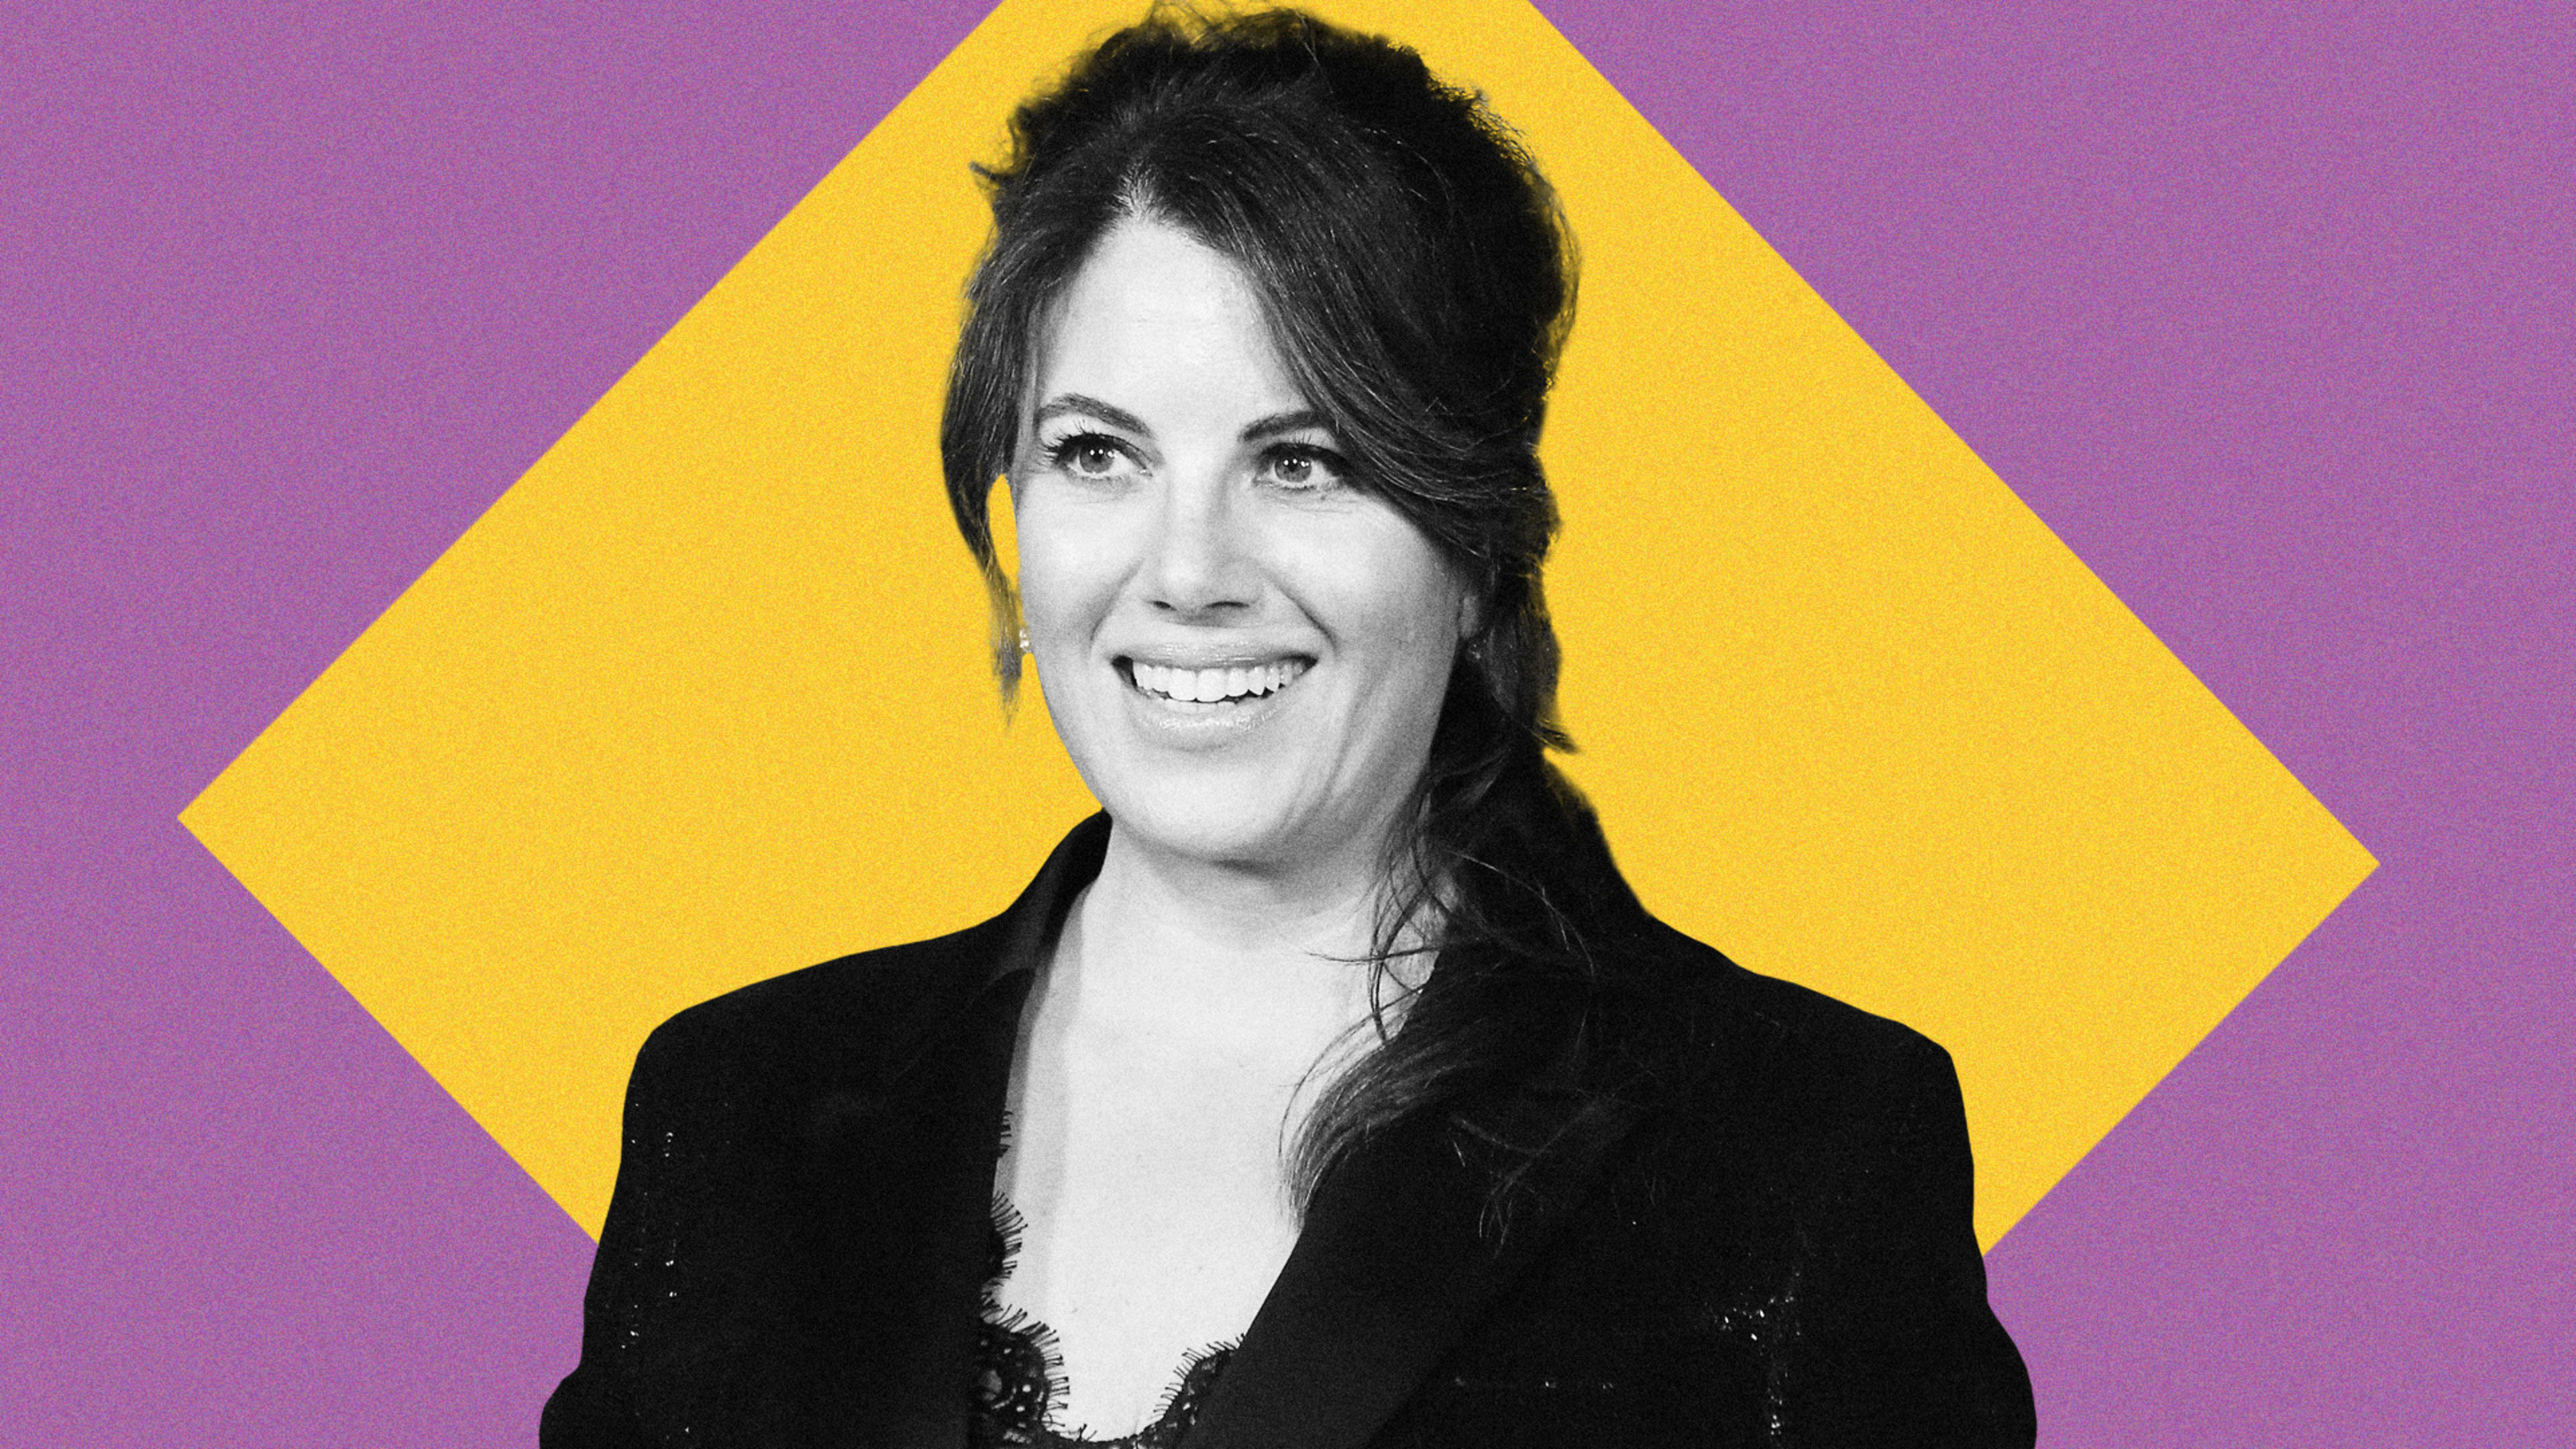 How Monica Lewinsky uses her personal experience to inform her creative anti-bullying efforts